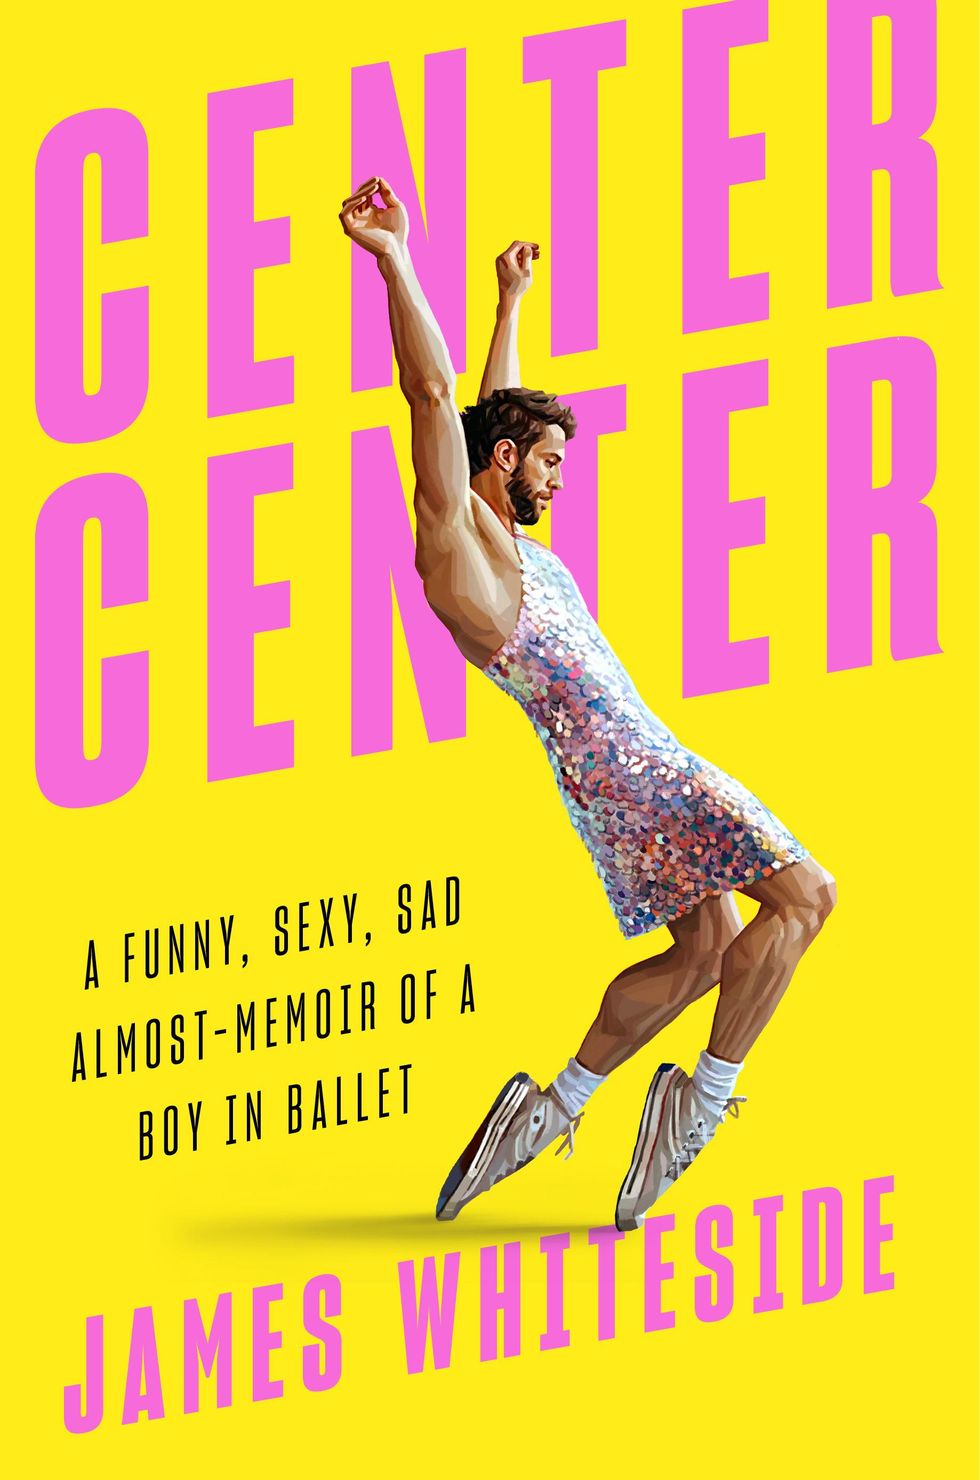 A bright yellow book cover with a painted image of James Whiteside wearing a short, sequined dress and dirty converse, balancing in forced arch. In pink and black lettering it reads, "Center Center: A Funny, Sexy, Sad Almost-Memoir of a Boy in Ballet. James Whiteside."